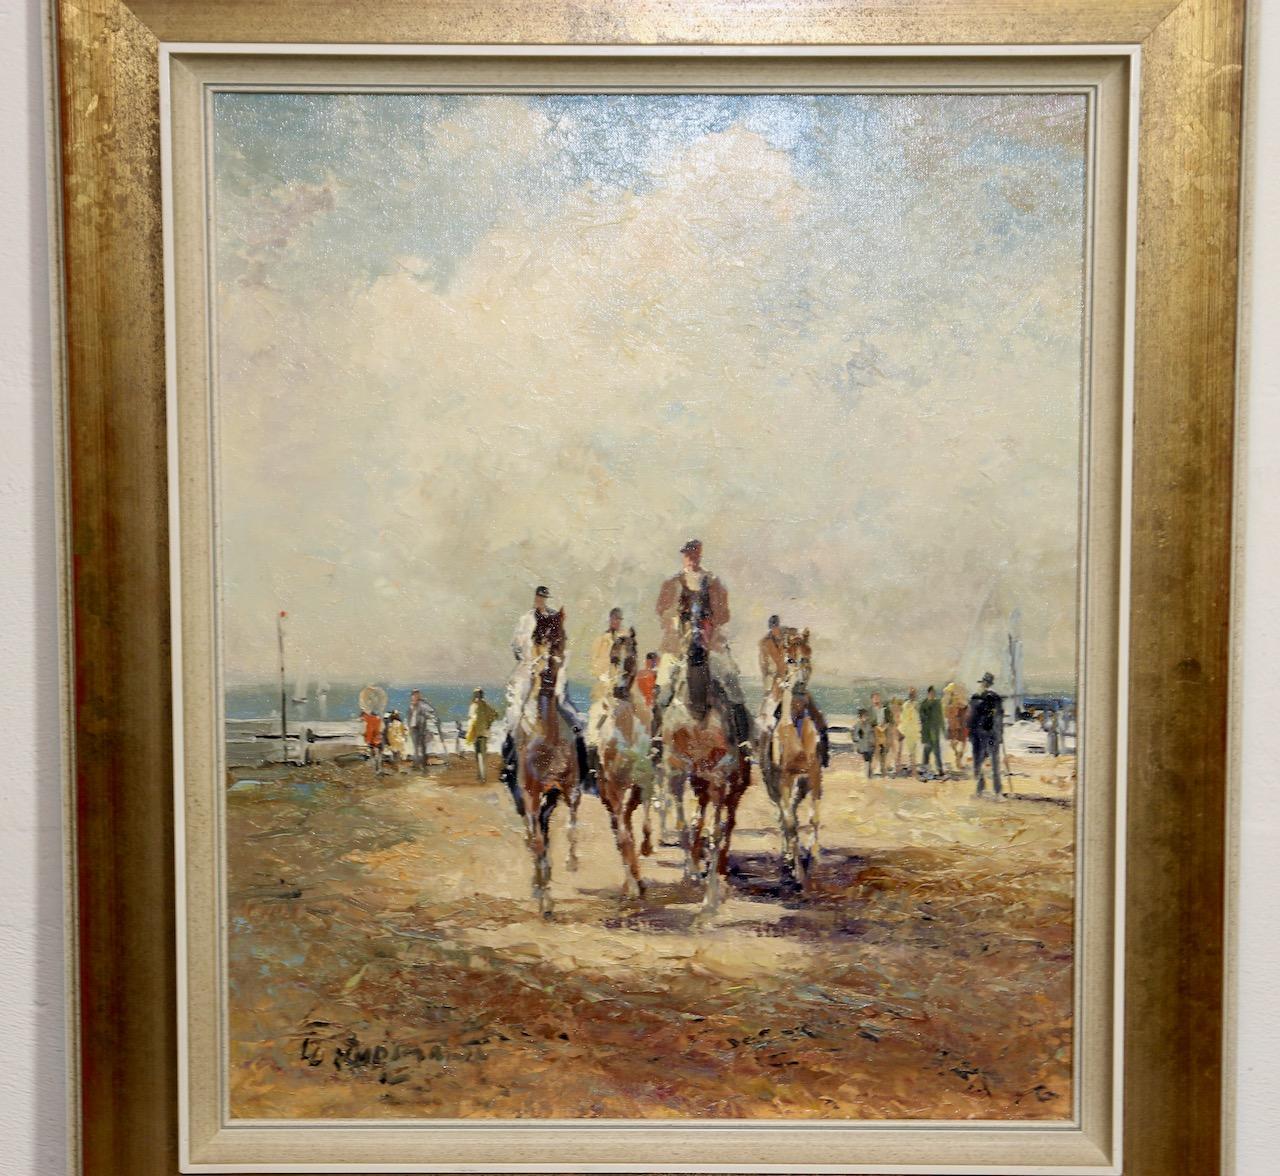 Ludwig Gschossmann, Summer beach landscape with riders, horses, people.

Munich artist.

Dimensions WITHOUT frame in cm 50 x 60
Dimensions WITH frame in cm 68 x 78

This picturesque work of art by Ludwig Gschussmann captures the idyllic moment of a